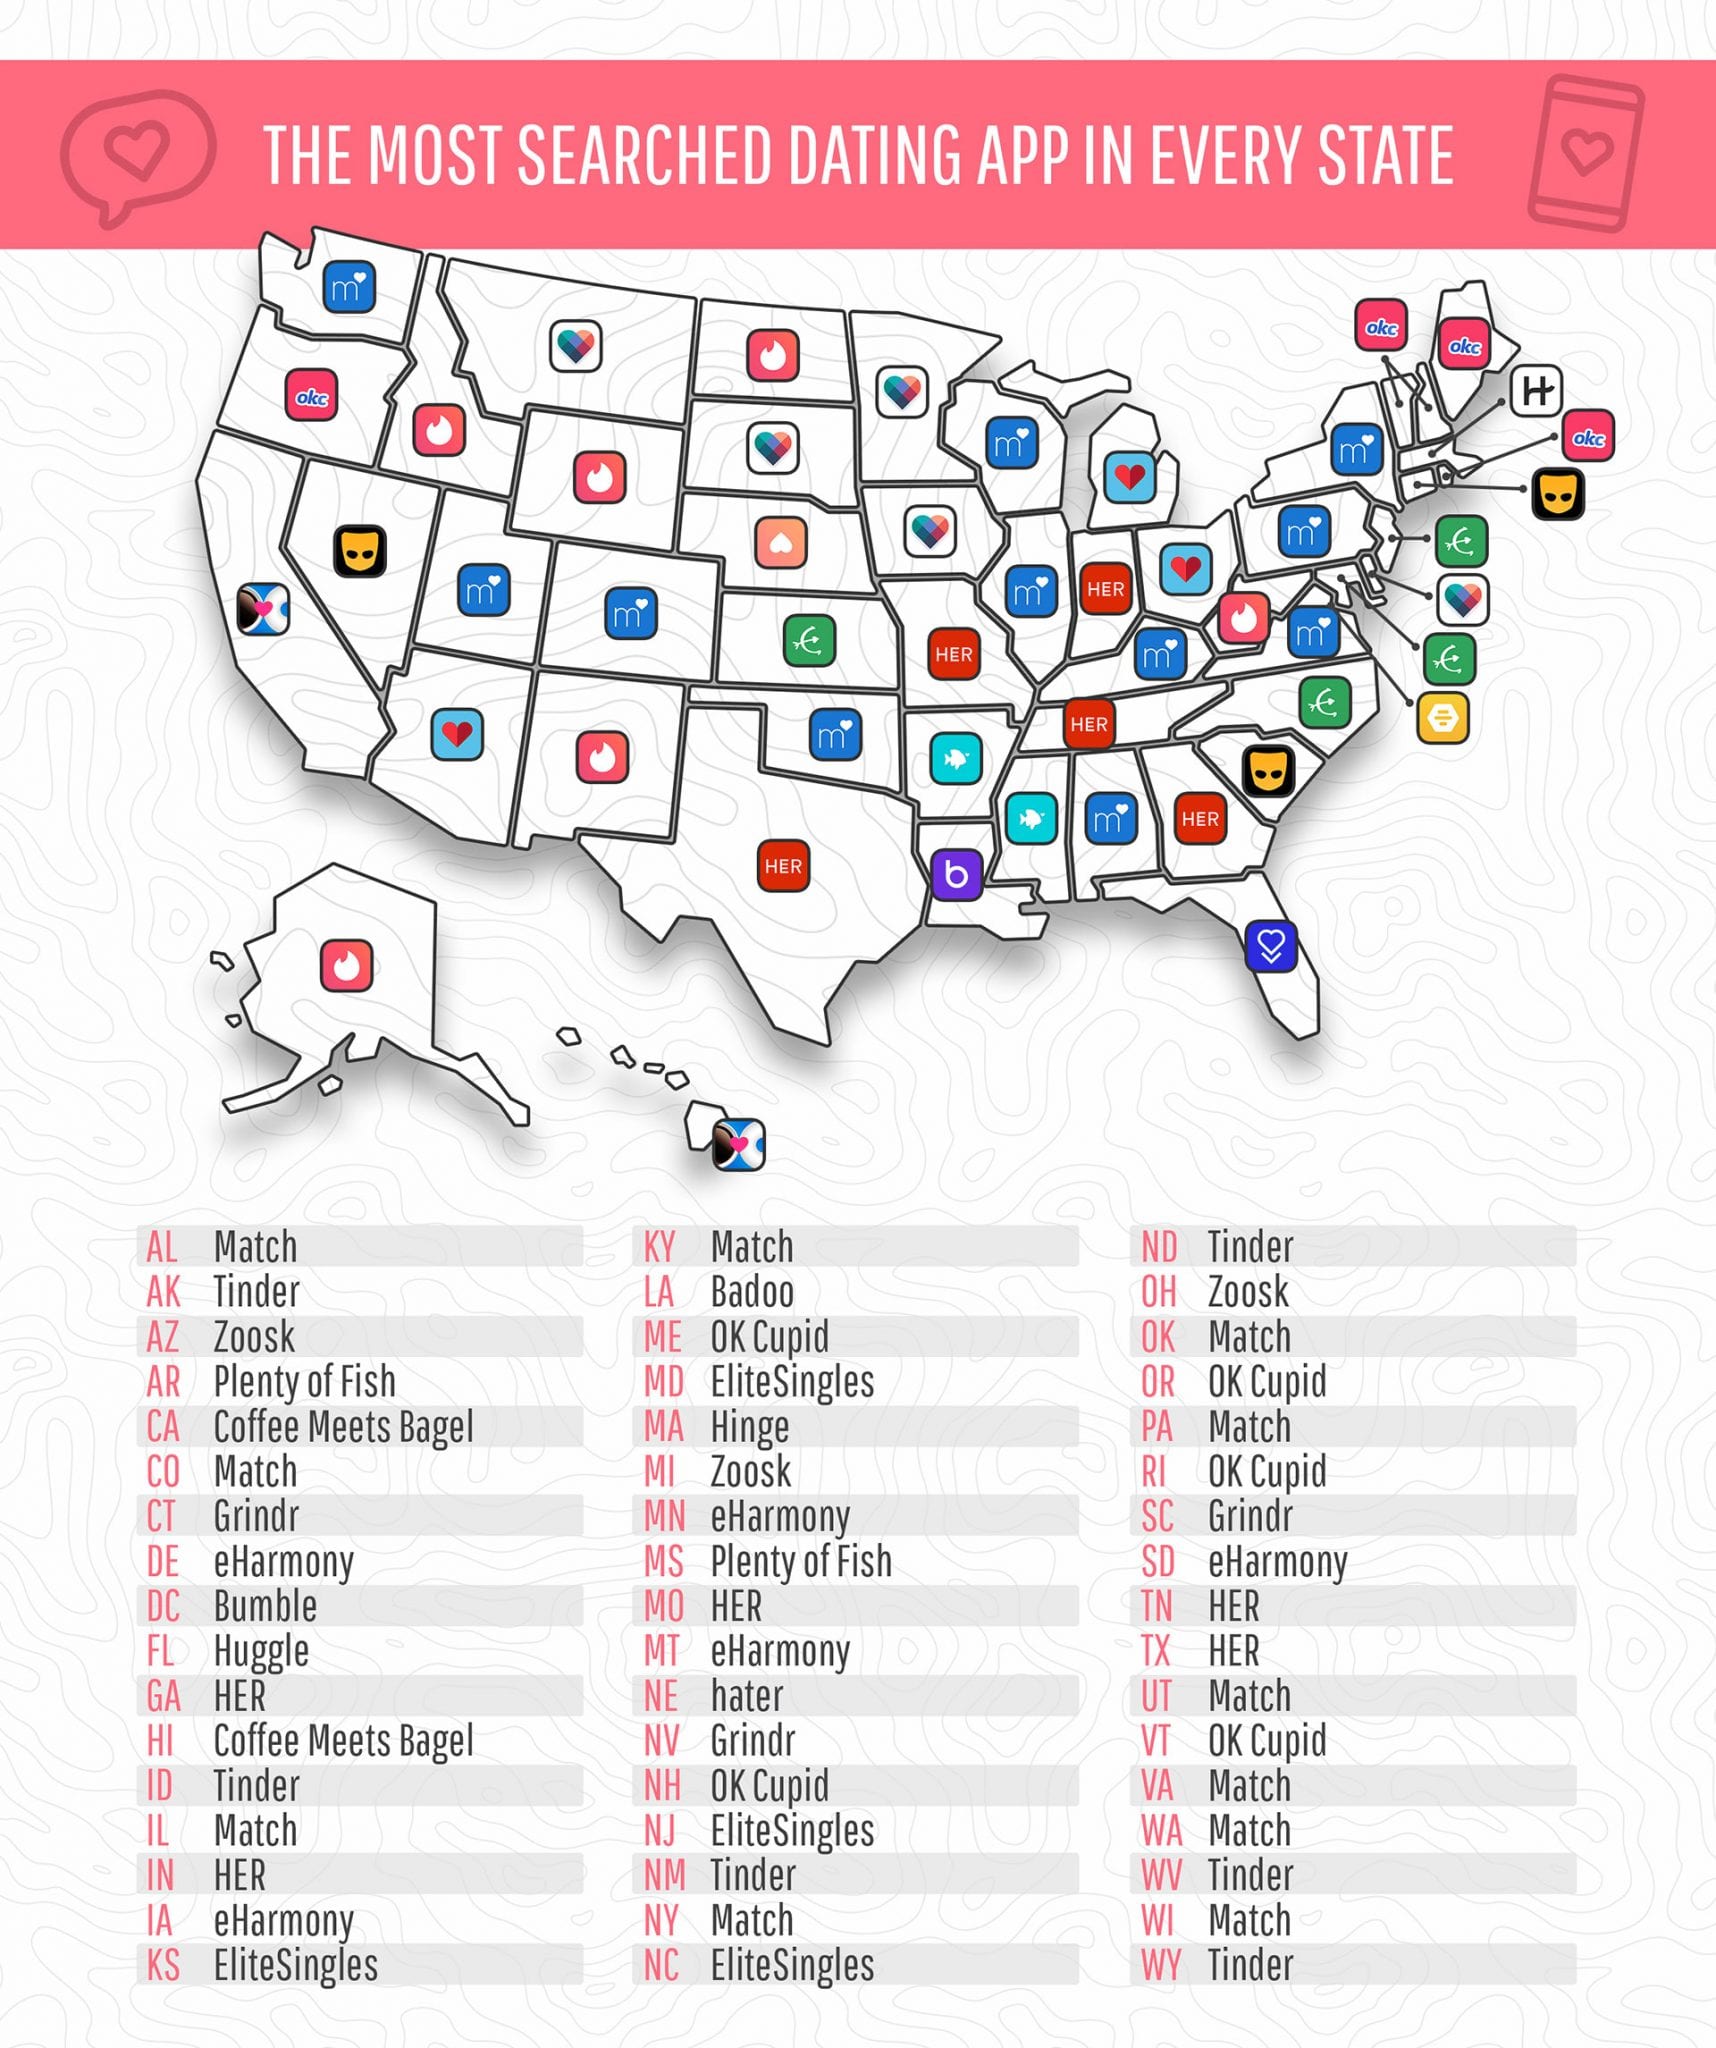 The most searched dating app in every state map